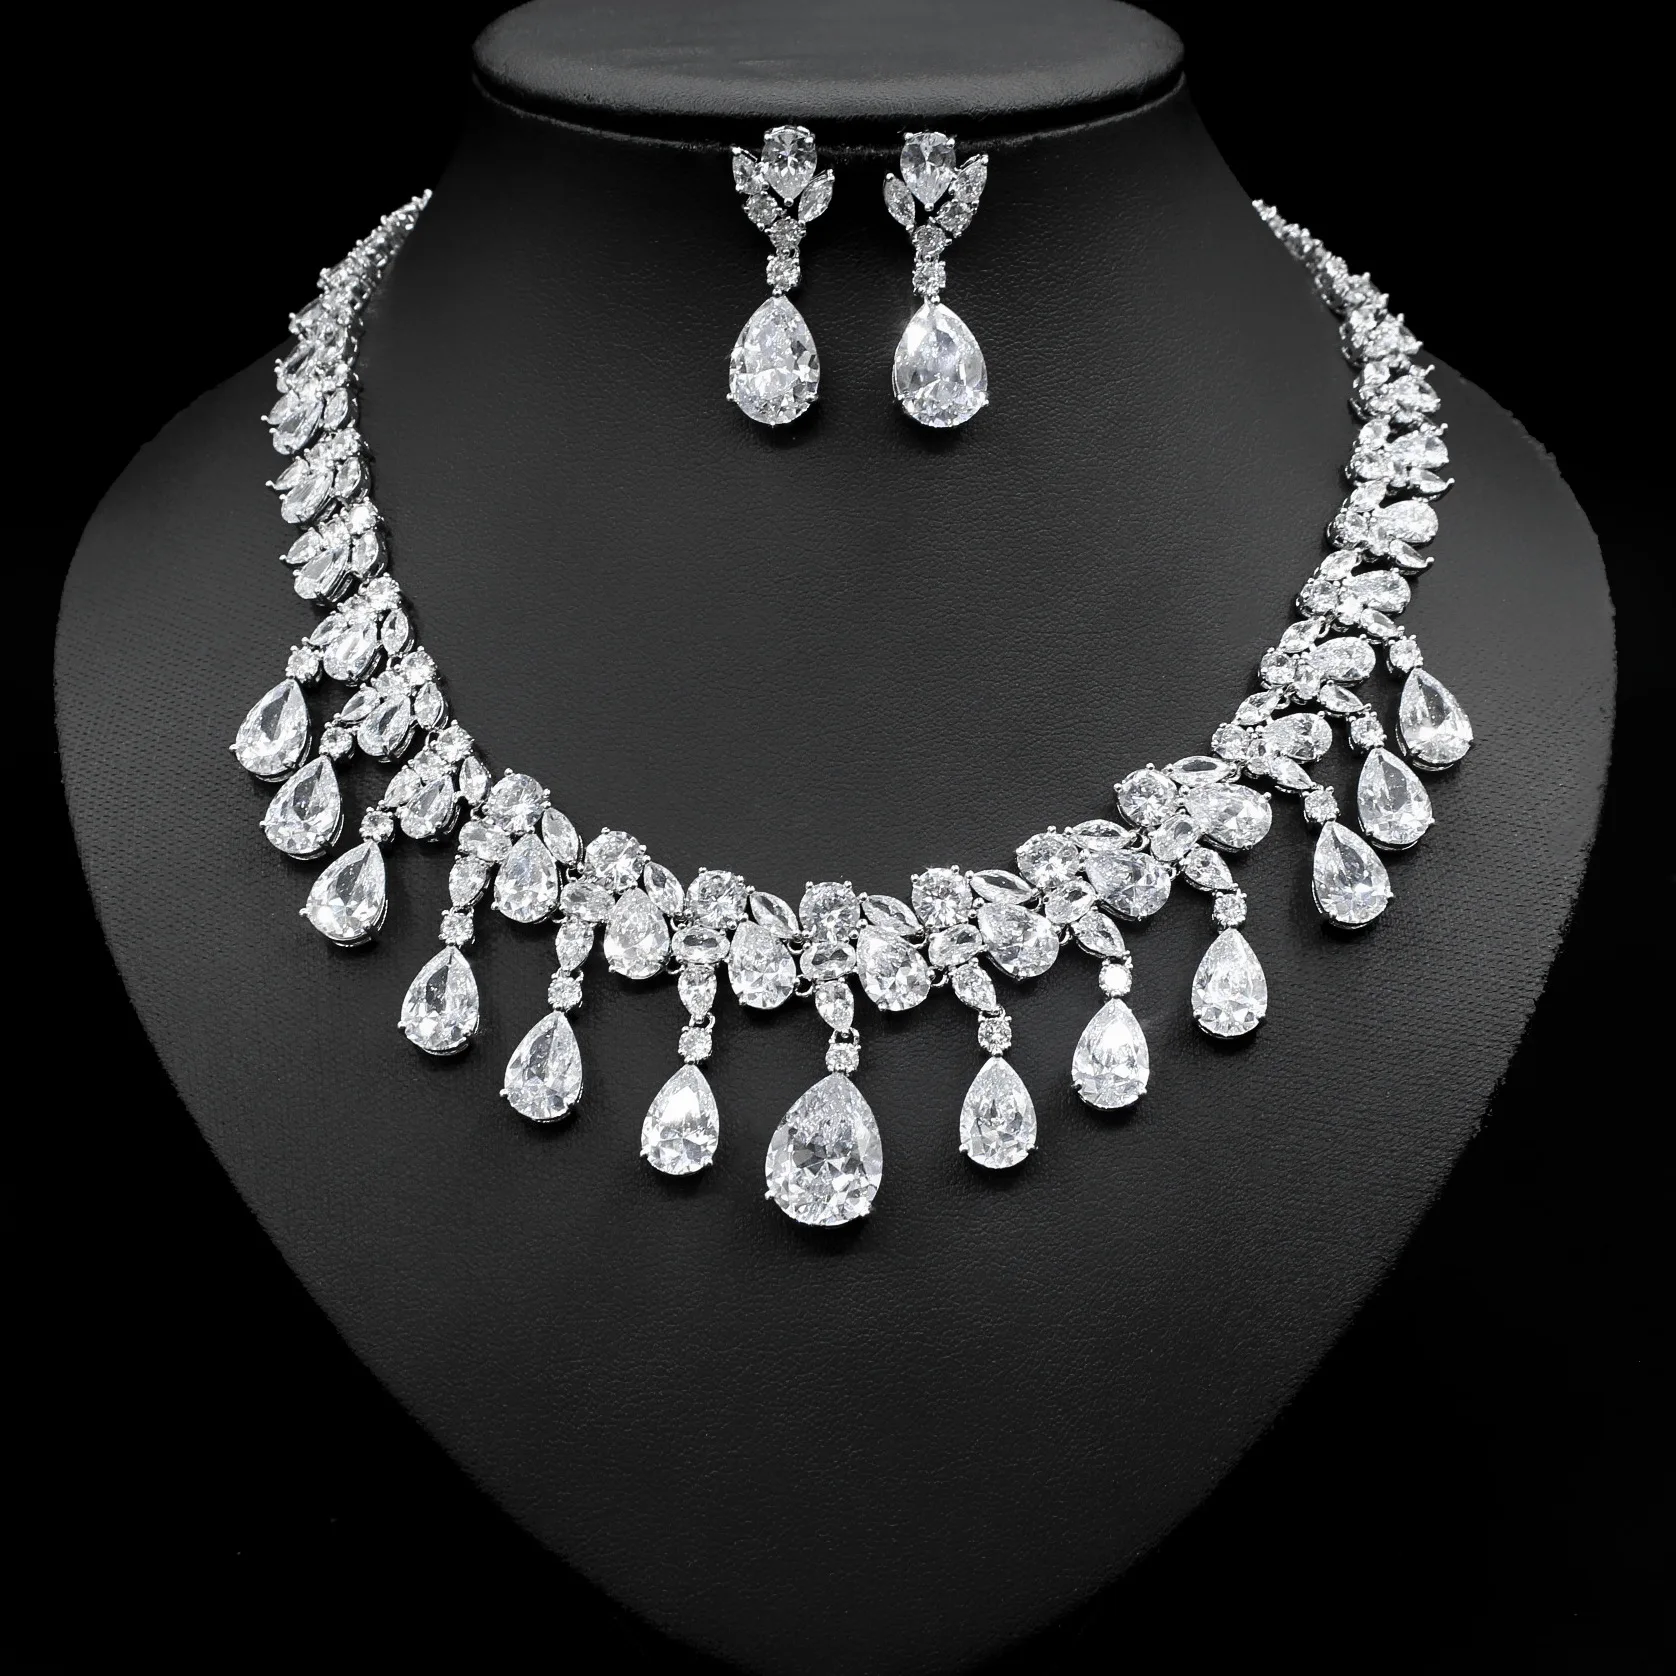 Funmode  Luxury Chunky Full Cubic Zirconia Paved Dinner Party Bridal Wedding Choker Big Necklace Jewelry Sets for Women FS288